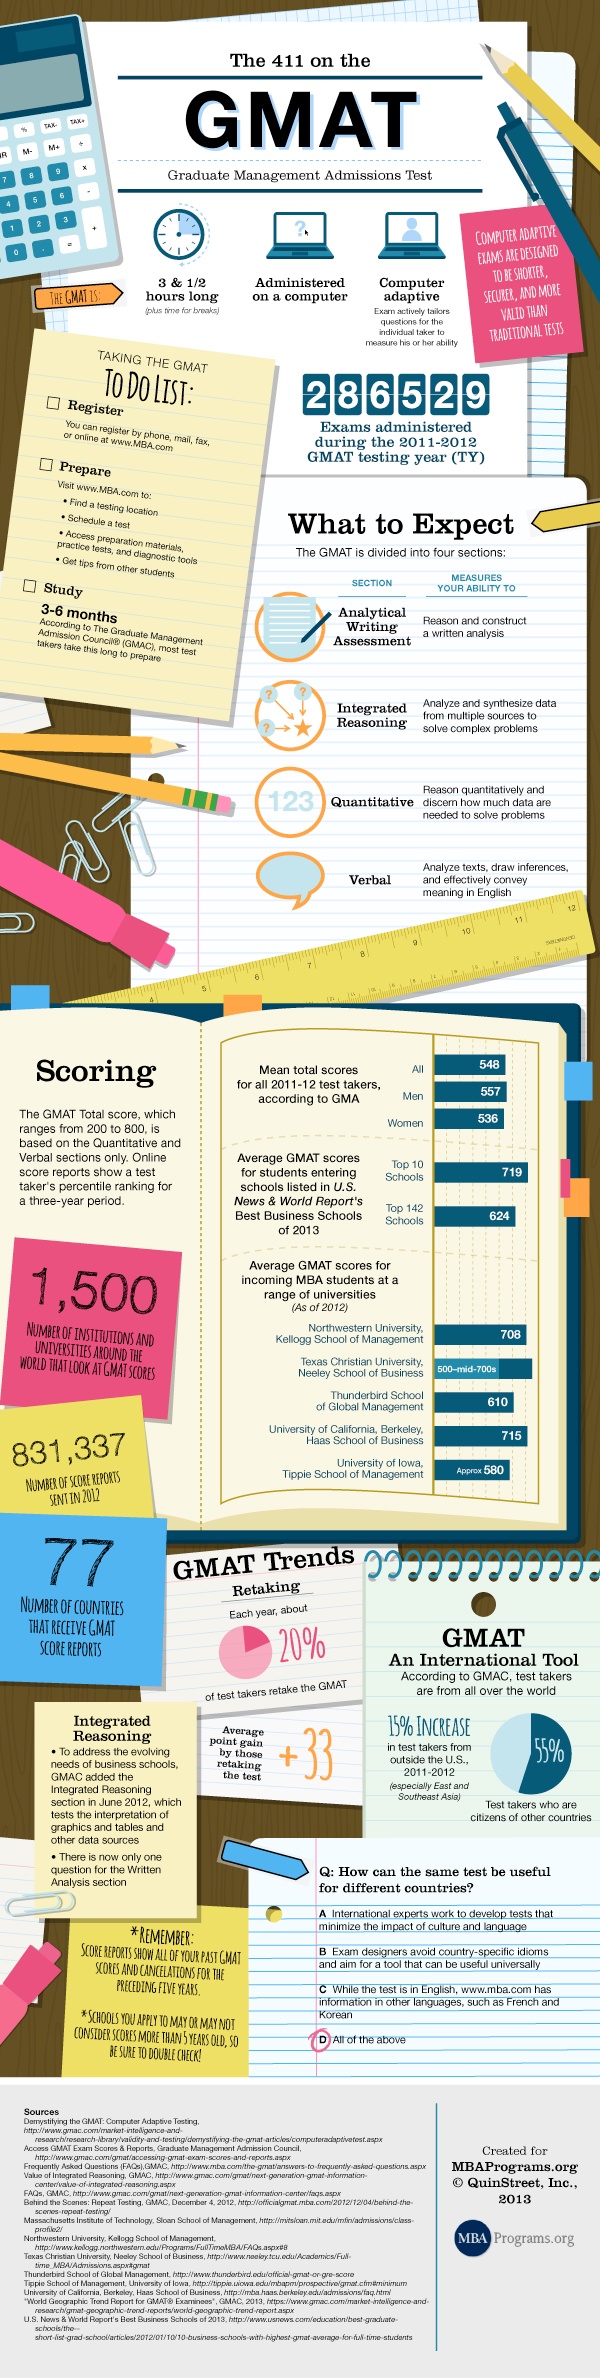 411-on-gmat infographic